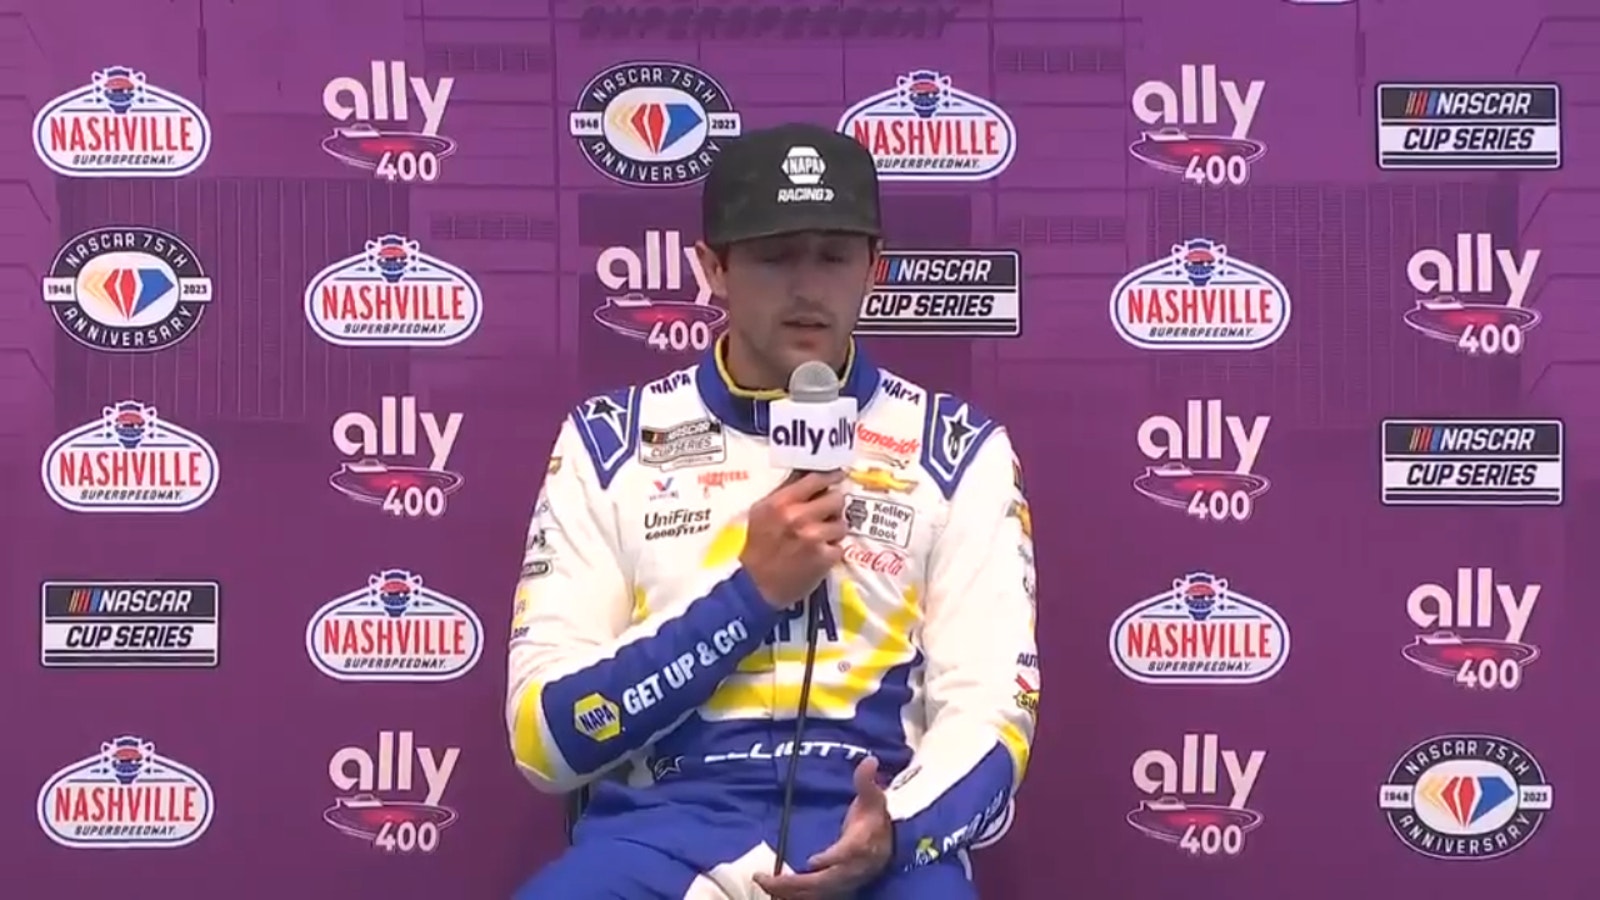 Chase Elliott on what will make the Chicago race successful